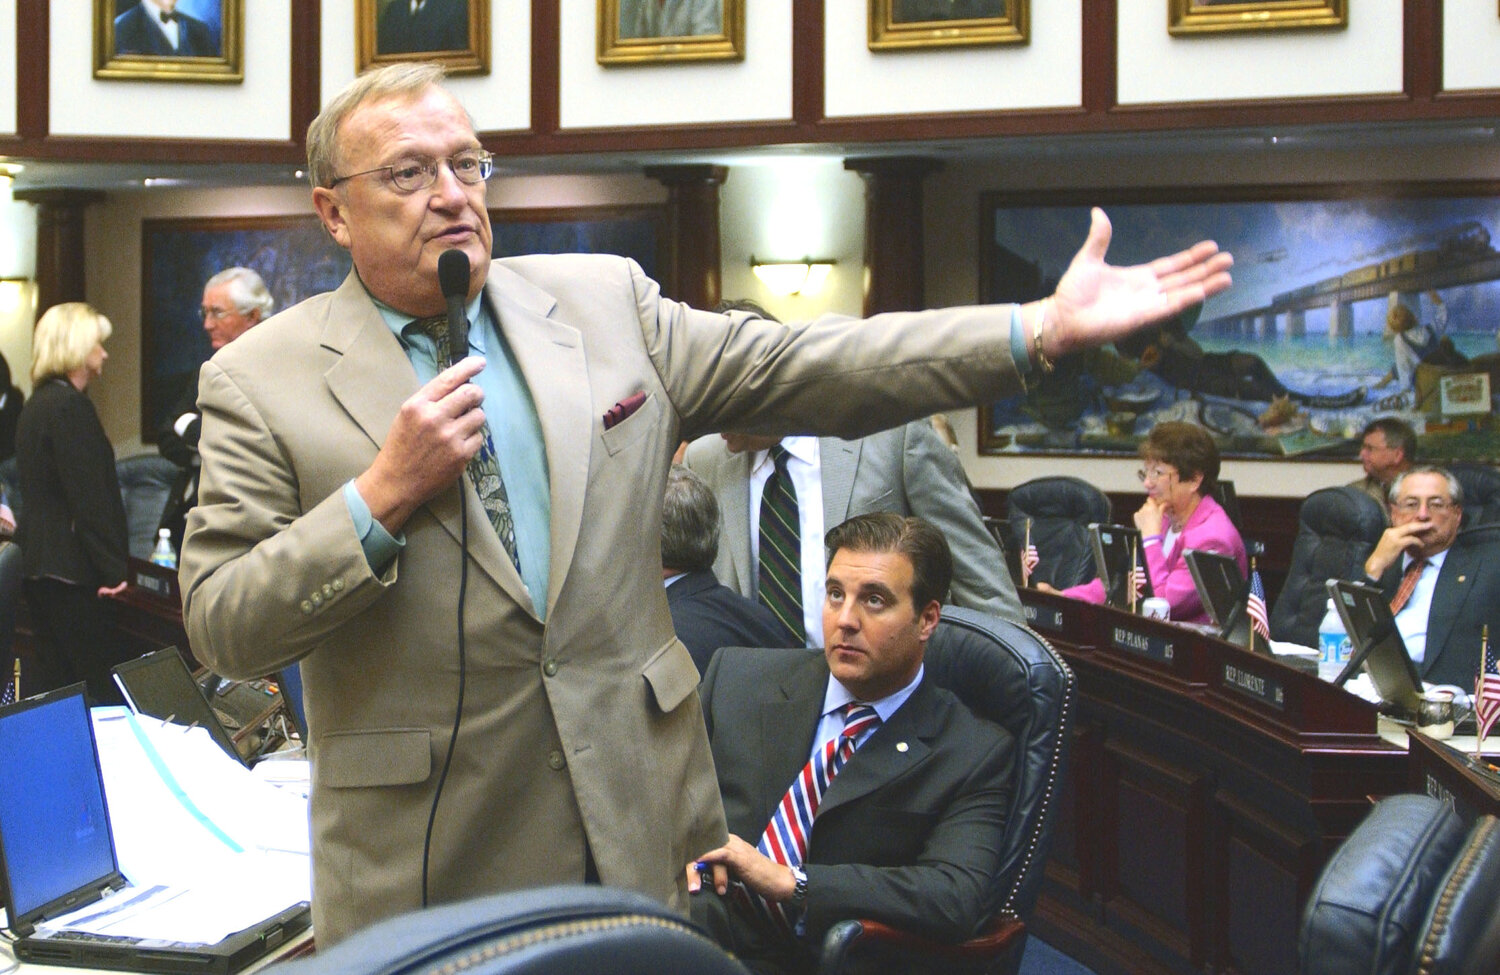 Fred Brummer, a former representative in the Florida Legislature, has died at age 77.